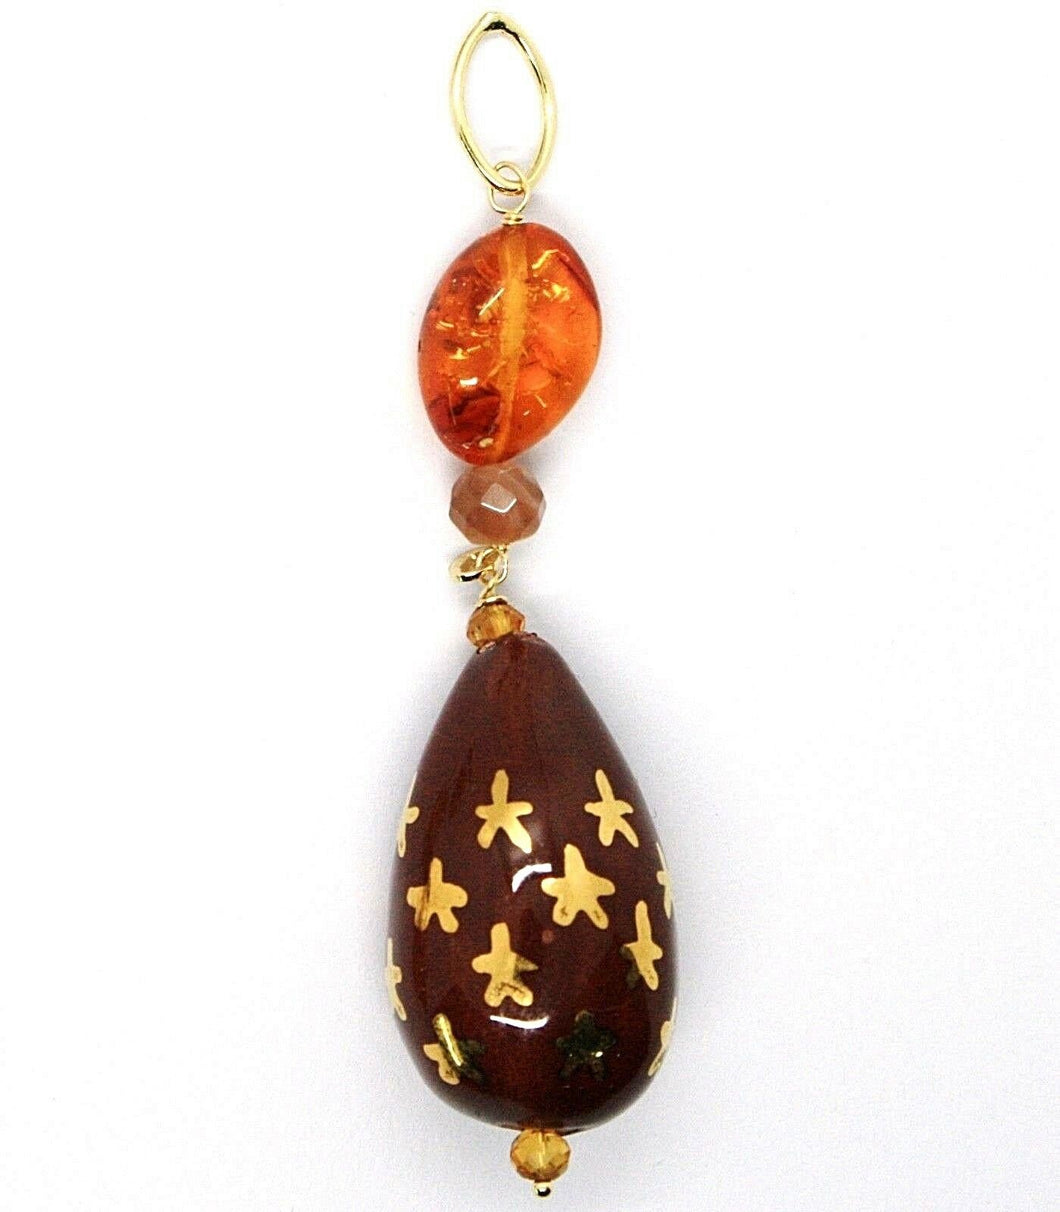 18K YELLOW GOLD PENDANT AMBER CITRINE ADULARIA, POTTERY DROPS HAND PAINTED STA.